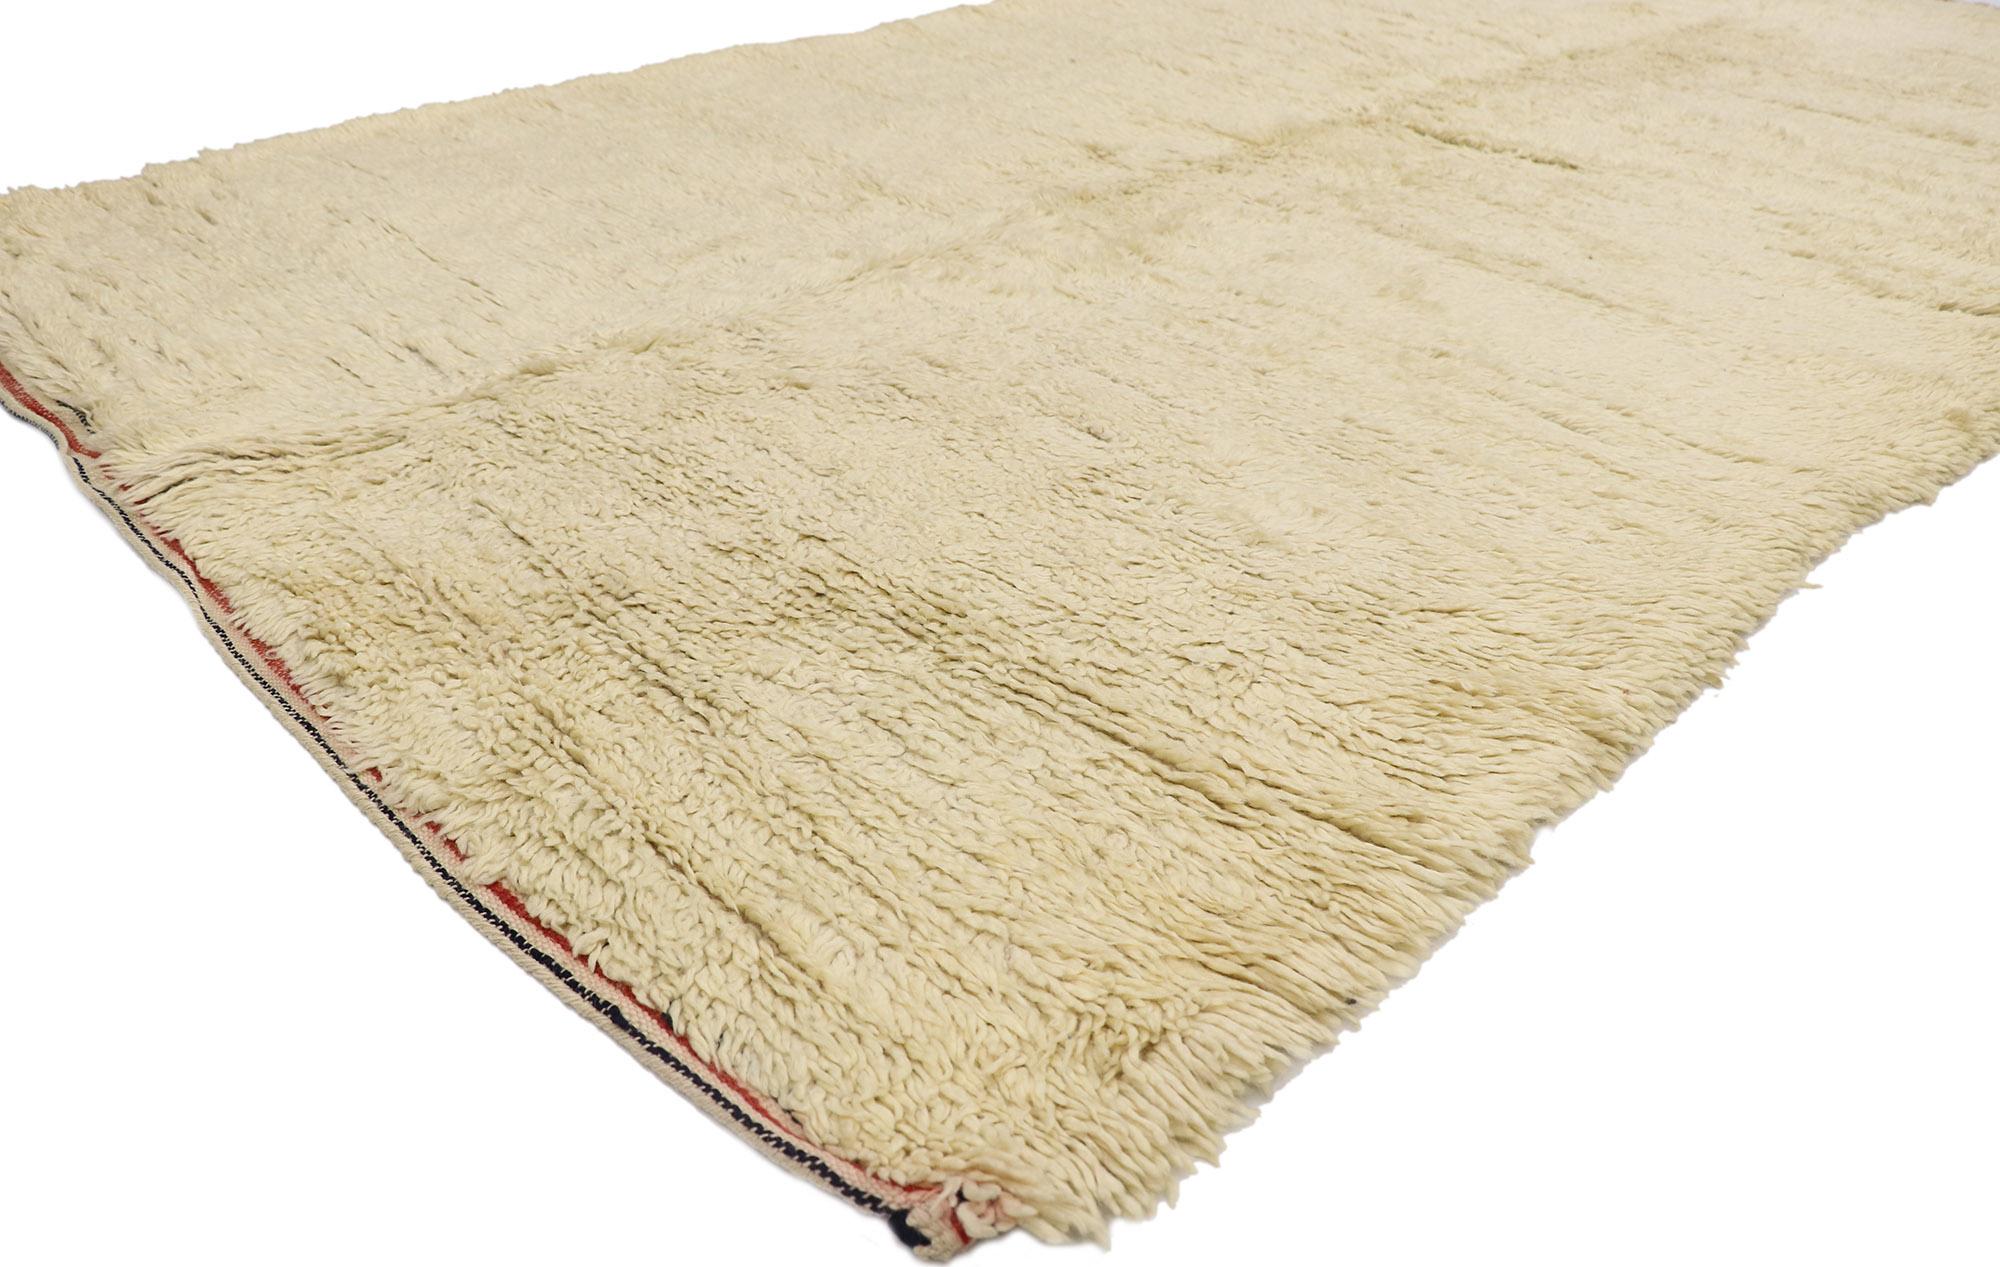 21388 Vintage Berber Beni Ourain Moroccan rug with Minimalist style 06'01 x 11'00. With its simplicity, plush pile and minimalist style, this hand knotted wool vintage Berber Beni Ourain Moroccan rug provides a feeling of cozy contentment without